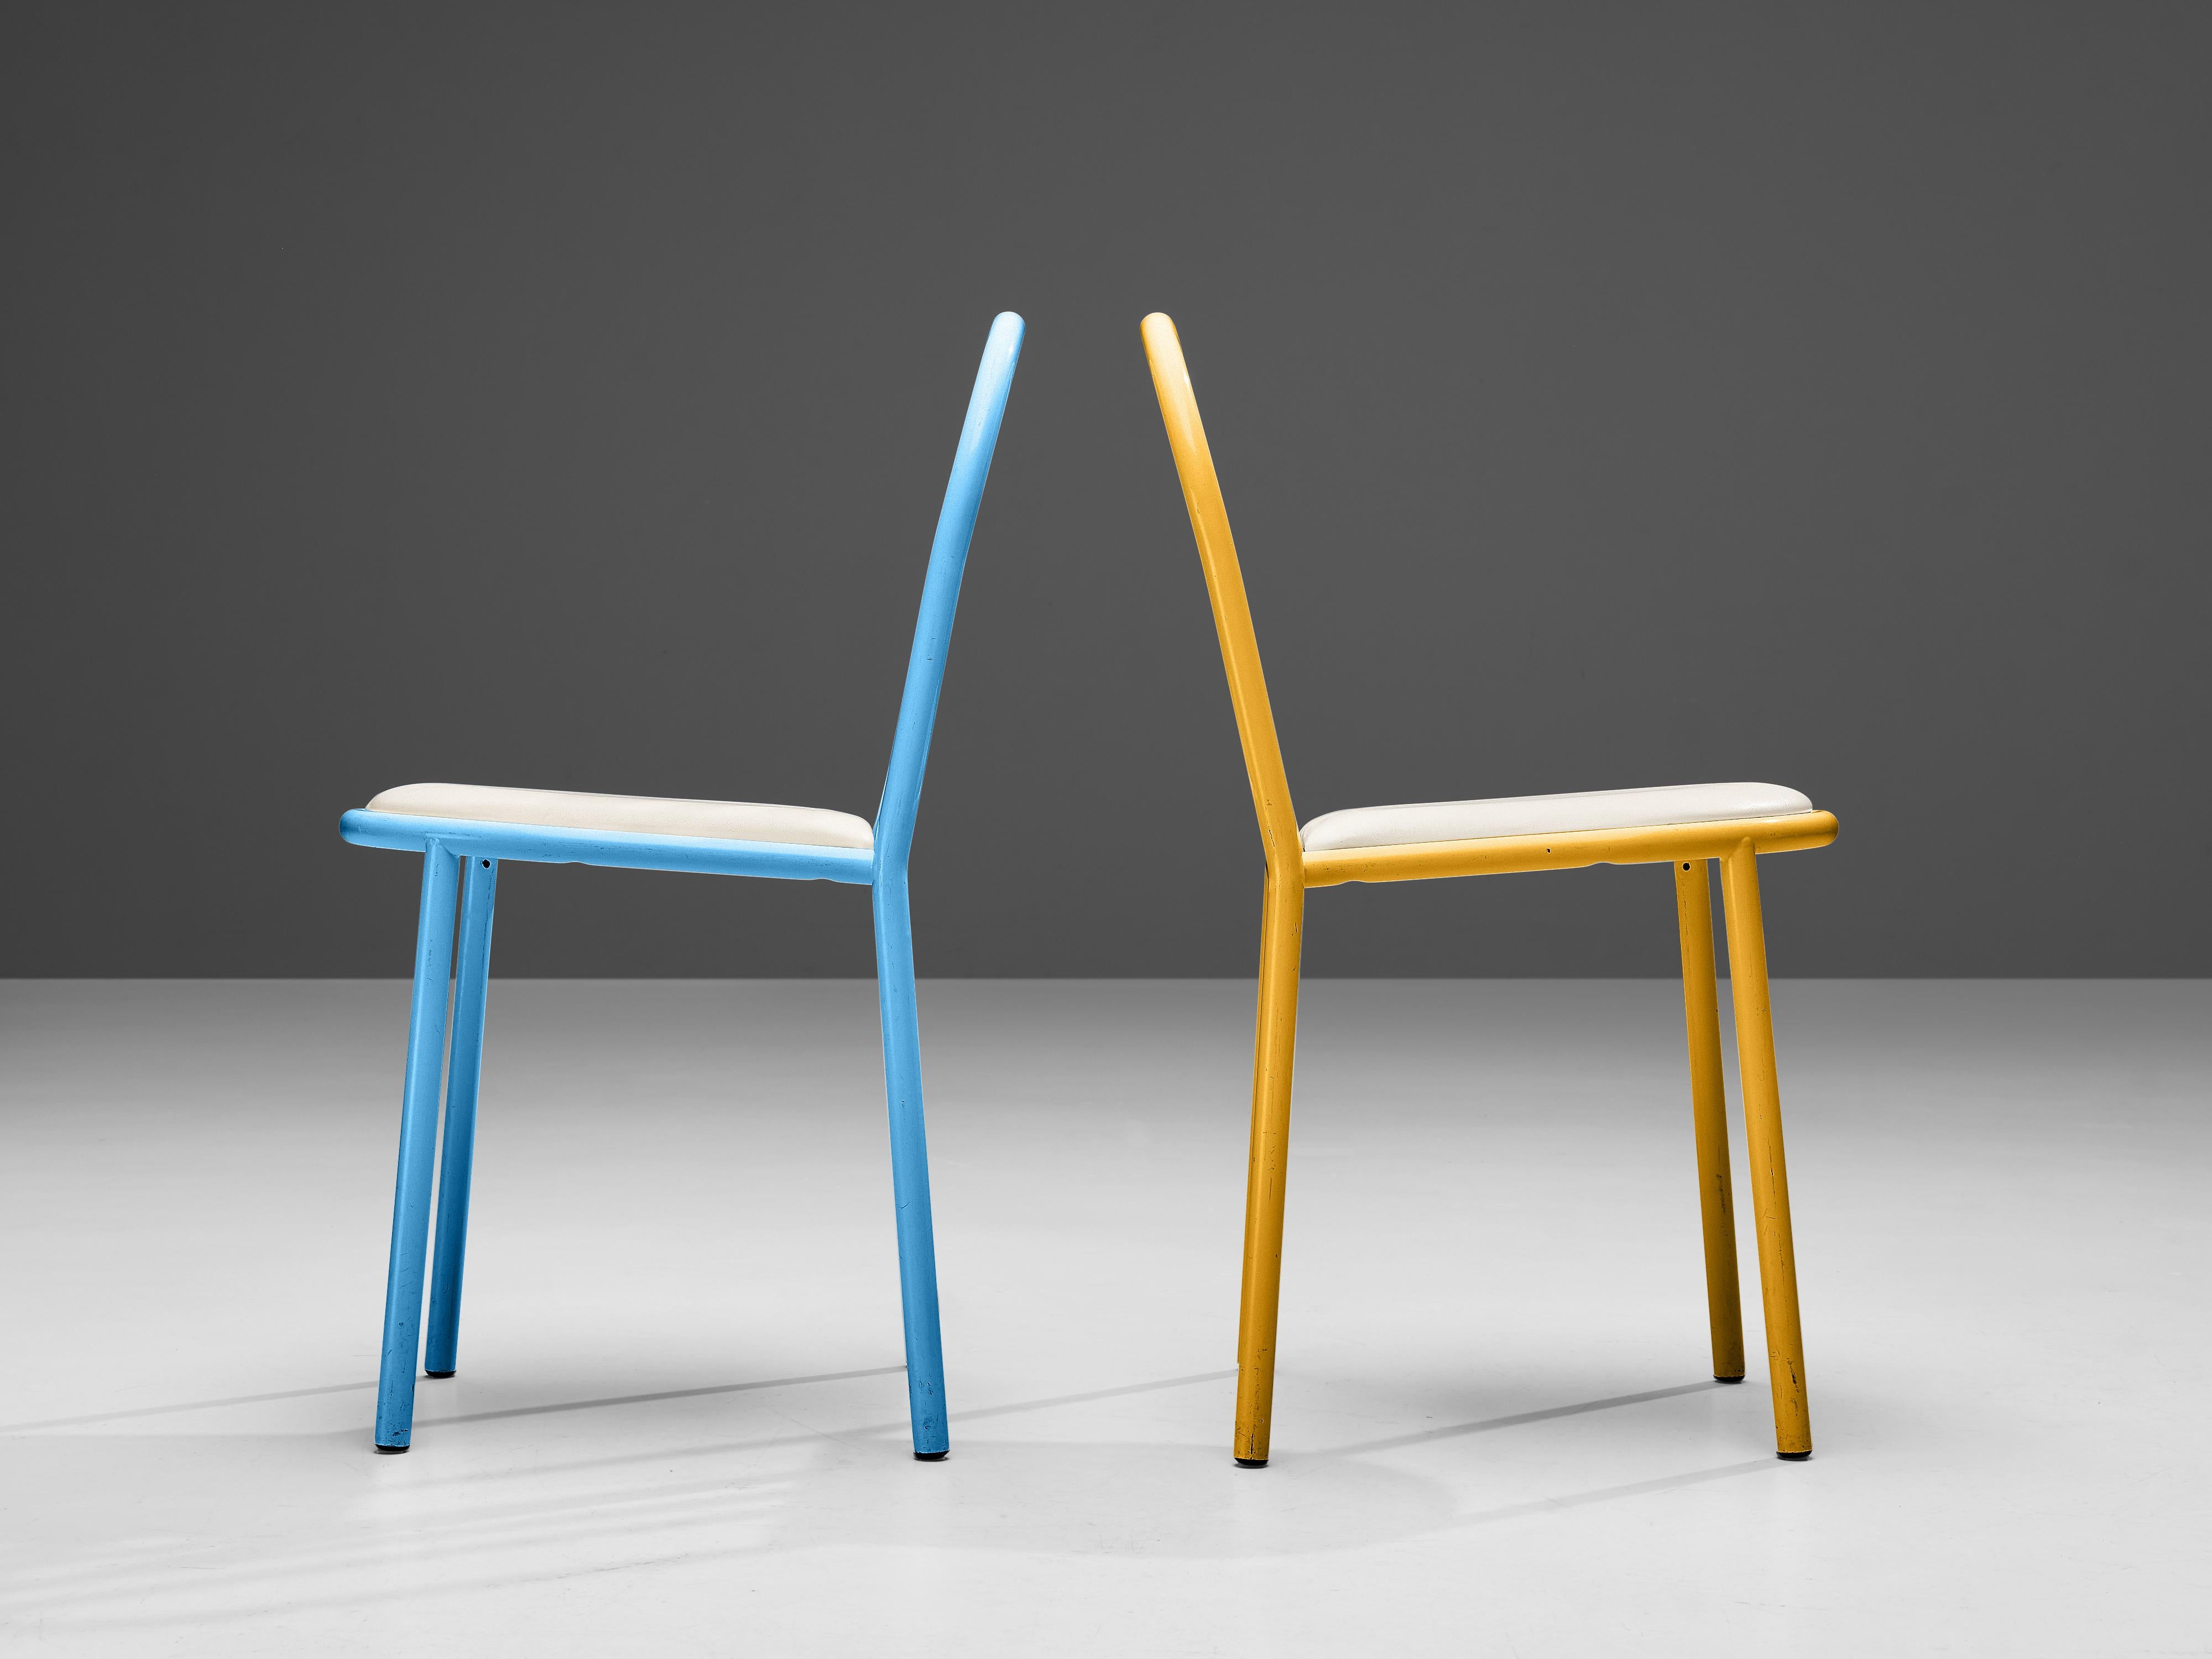 Mid-20th Century Robert Mallet-Stevens Dining Chairs in Colourful Metal For Sale